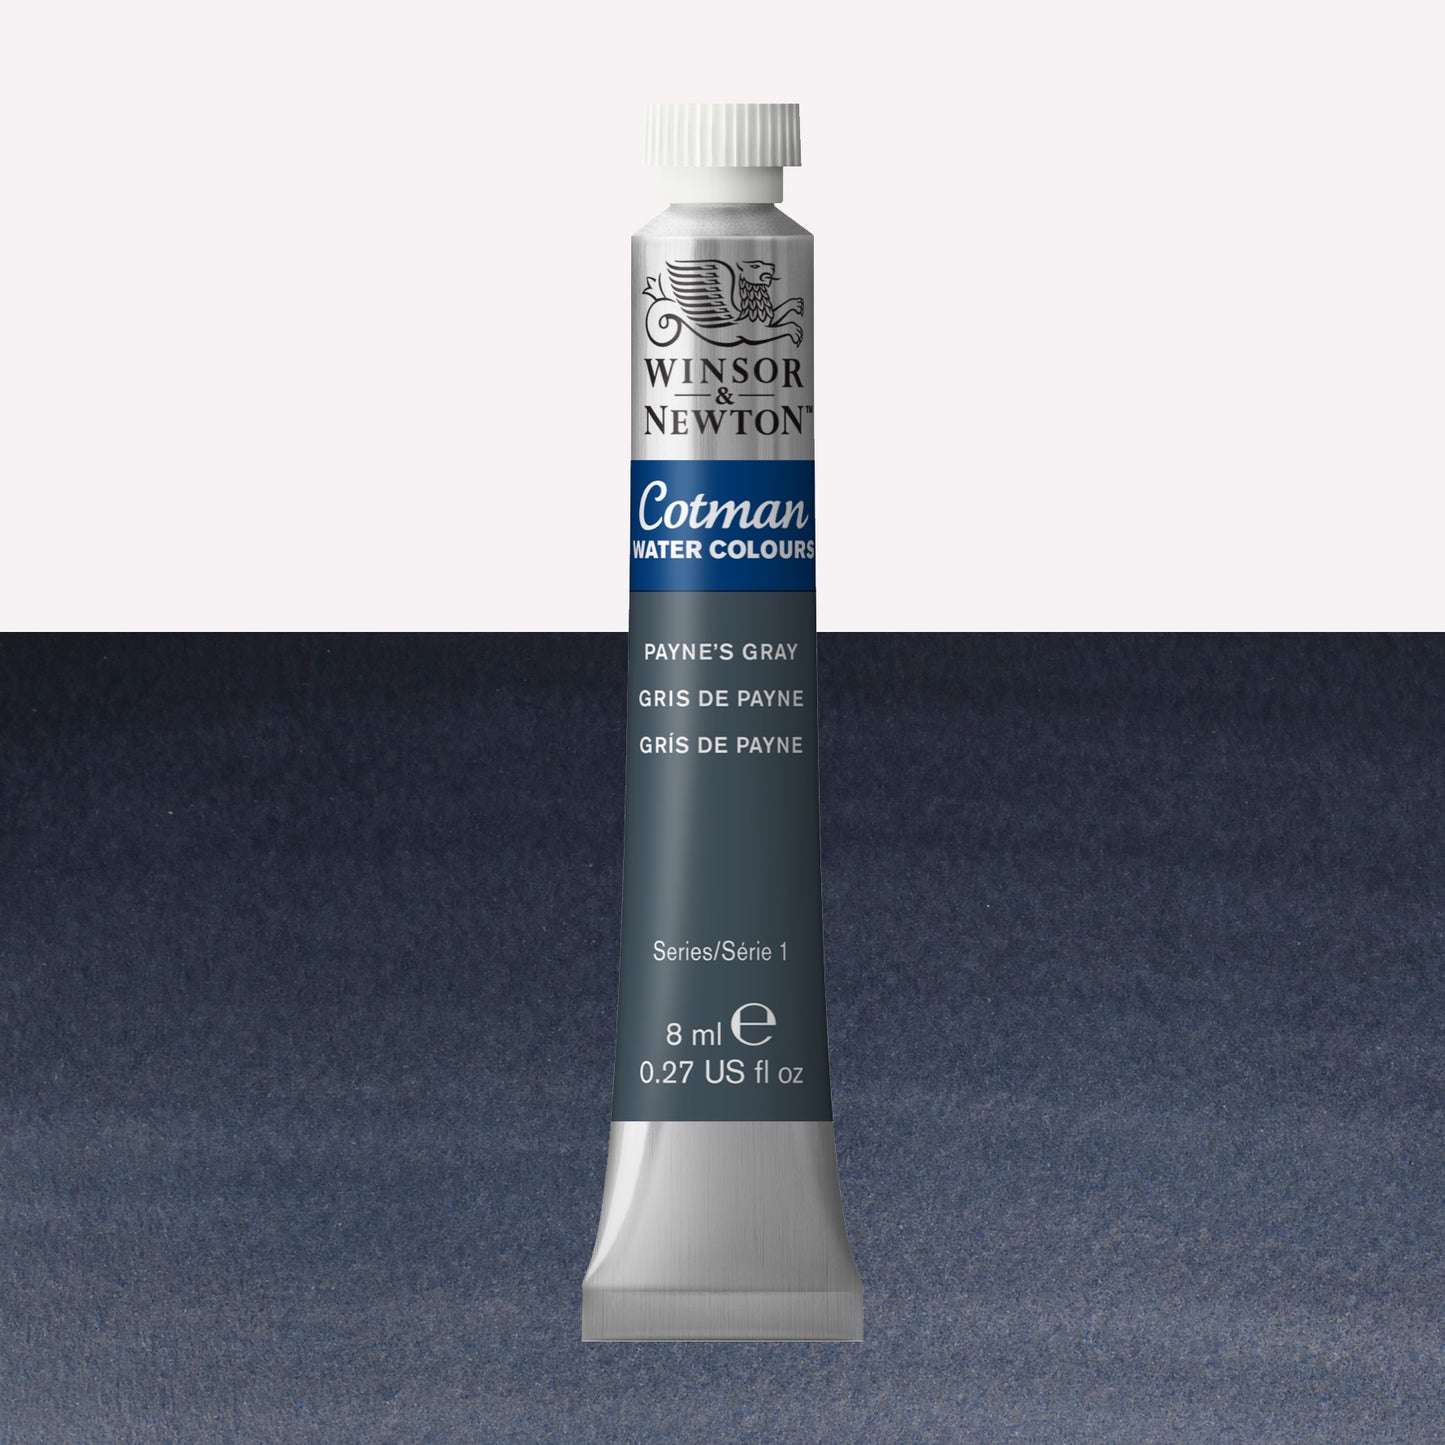 Winsor & Newton Cotman watercolour paint packaged in 8ml silver tube with a white lid in the shade Payne’s Grey over a highly pigmented colour swatch.